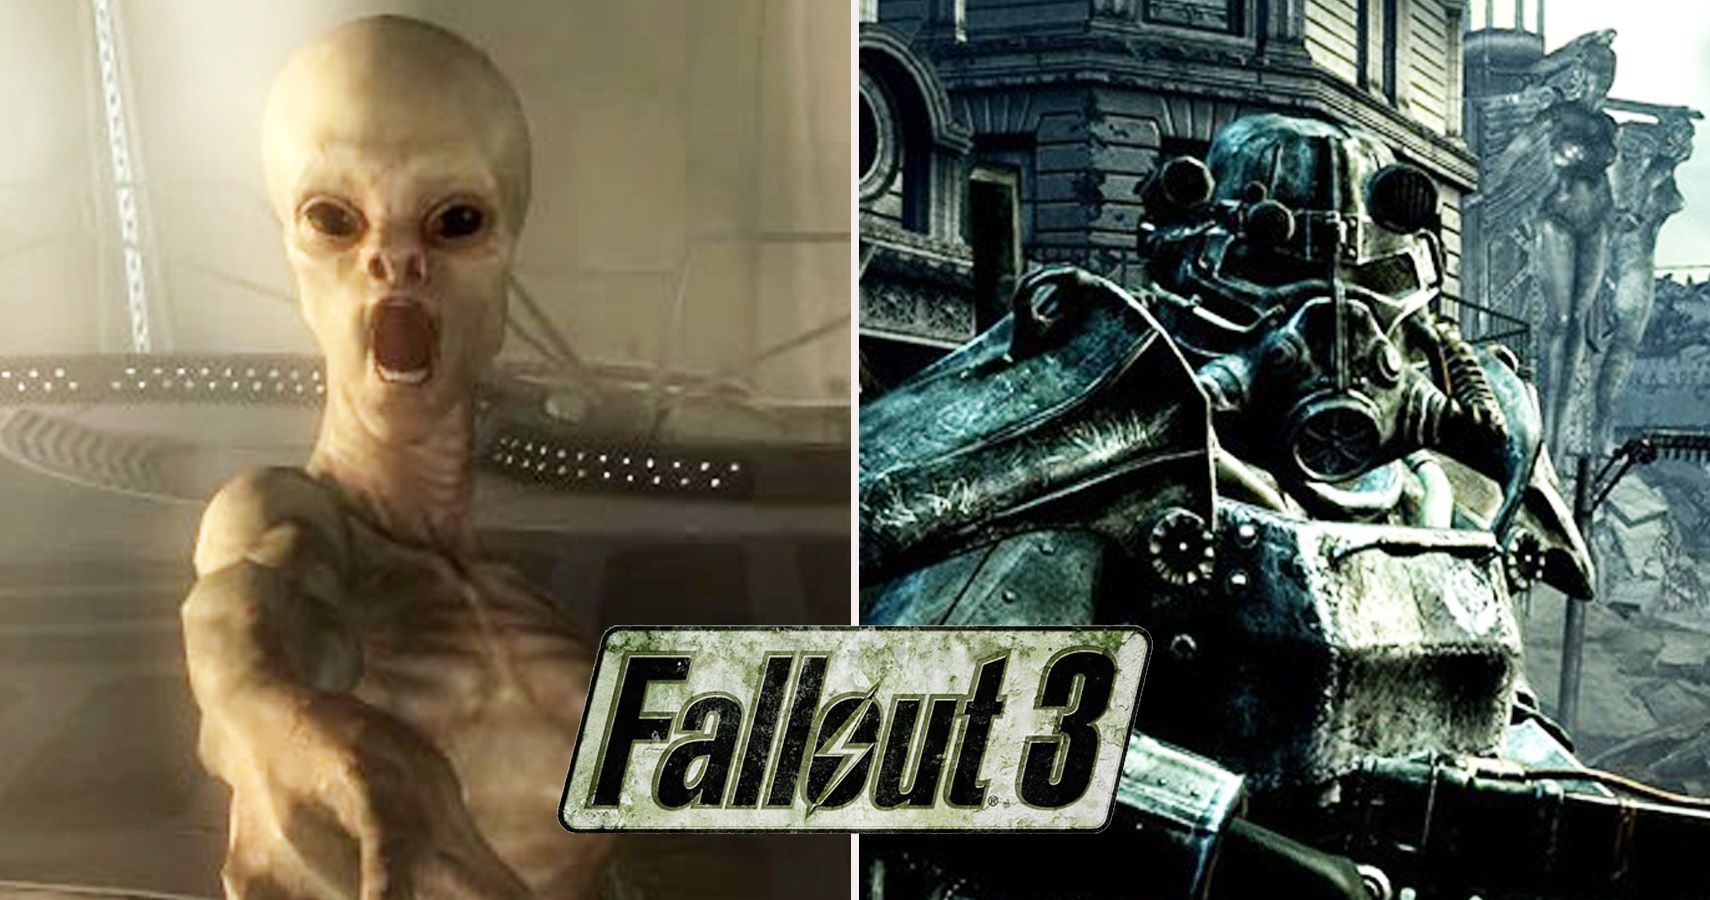 Fallout 3 is Suddenly One of The Best-Looking Games on Earth